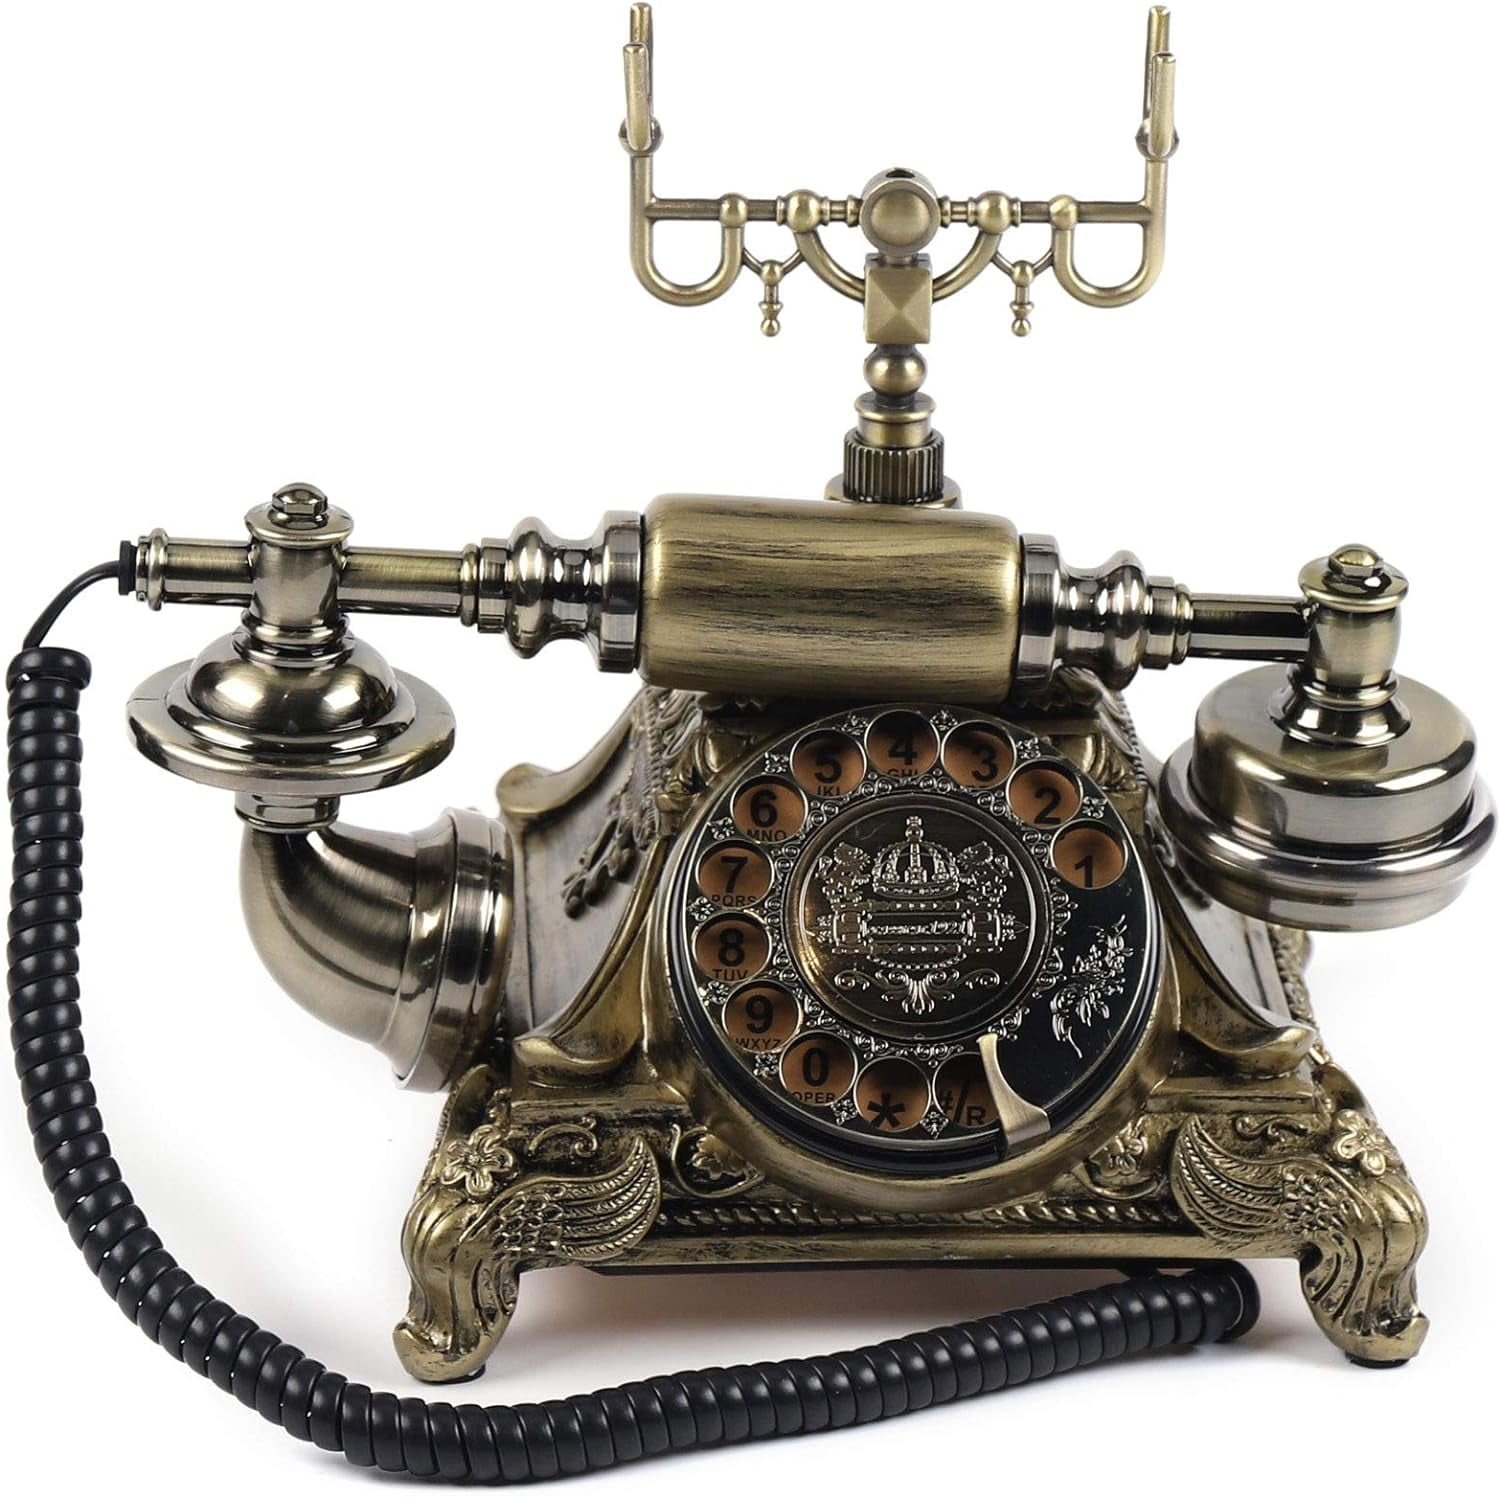 Retro Vintage Phone Old Fashioned with Rotary Dial European Antique  Telephone Classic Corded Rotary Dial Phone Vintage Landline Phones for Home  Hotel